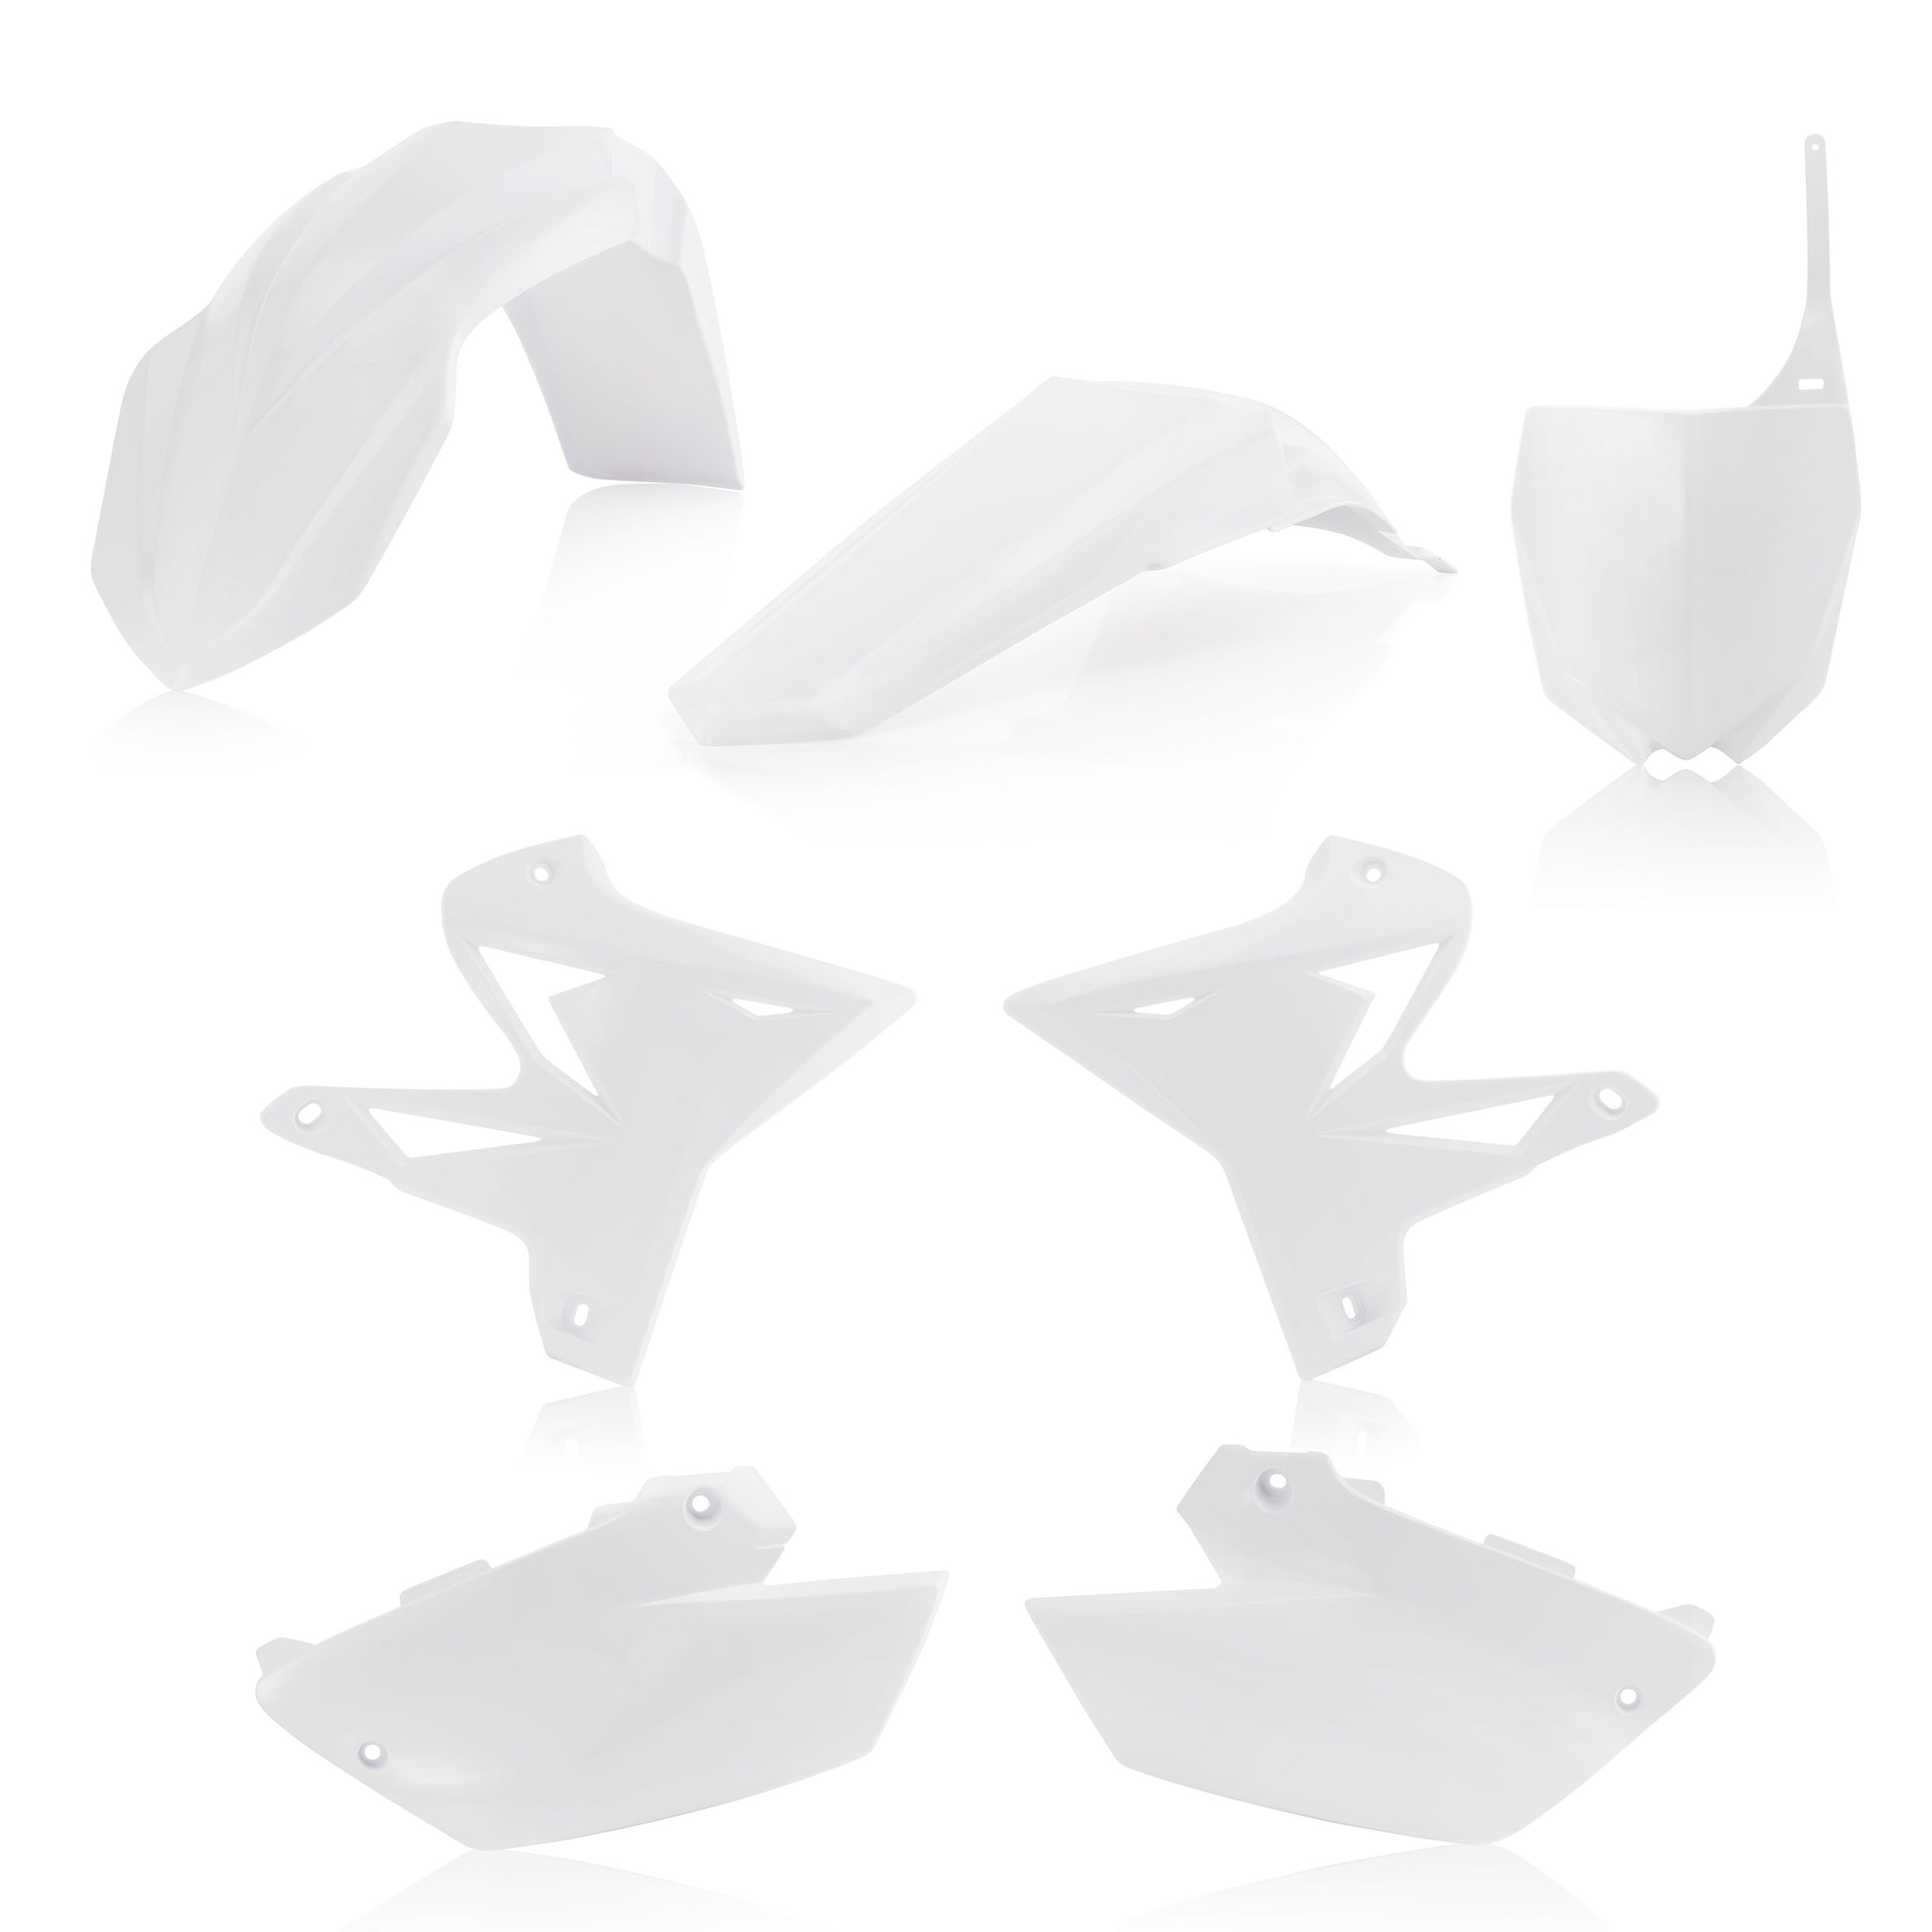 ACERBIS 0023488.030 KIT RESTYLING BIANCO COMPATIBLE CON YAMAHA YZ 250 02/14